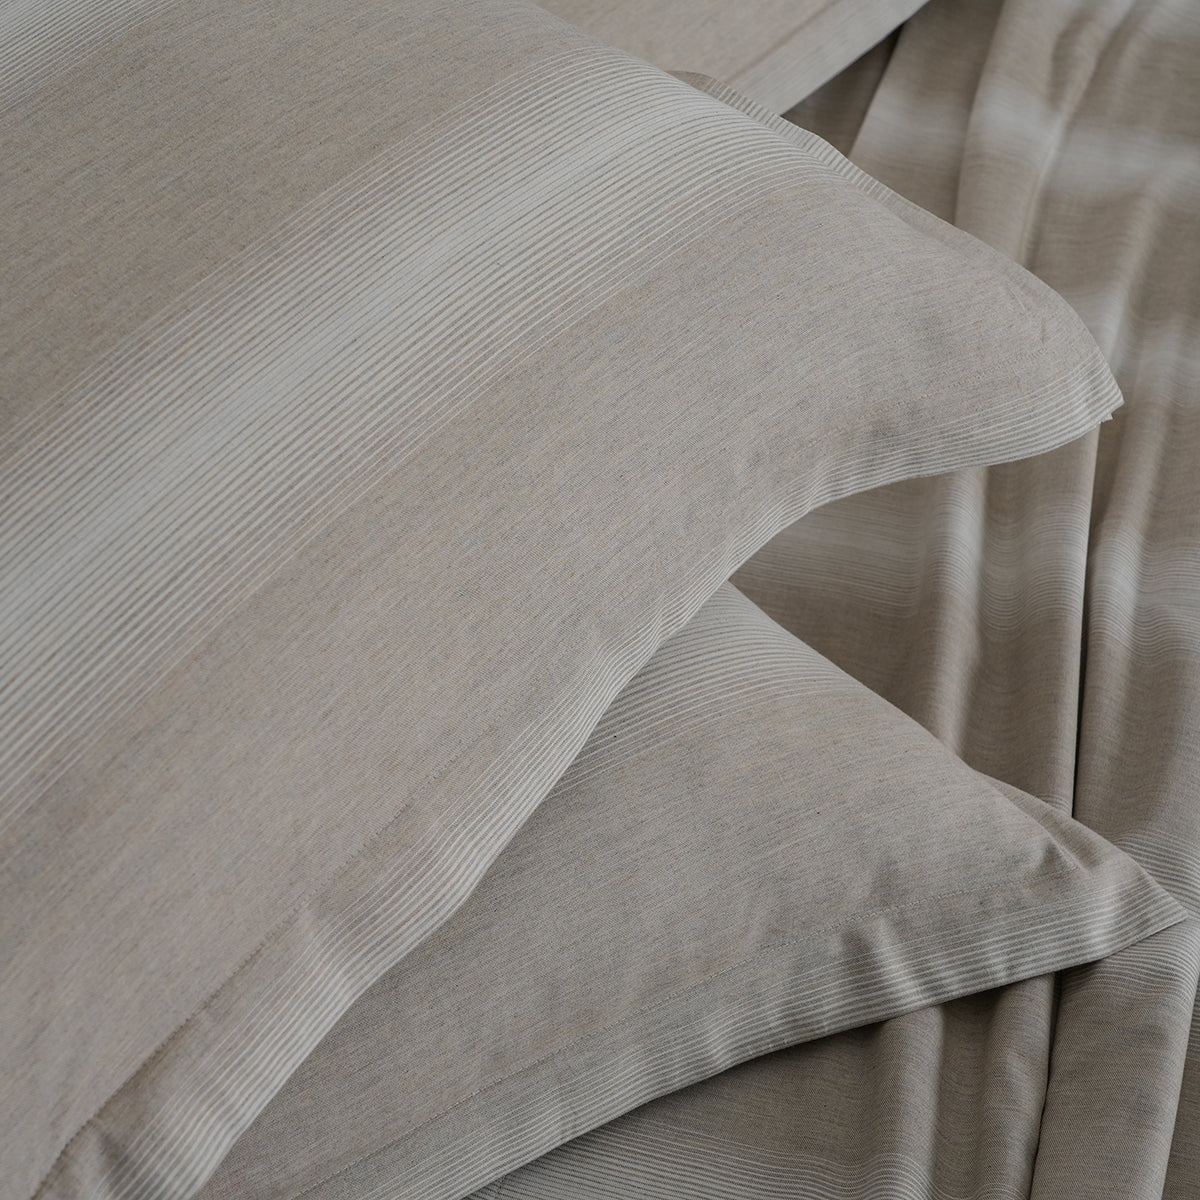 Rhythmic Stripe Reversible Made With Egyptian Cotton Ultra Soft Chinchilla/White Bed Sheet Set